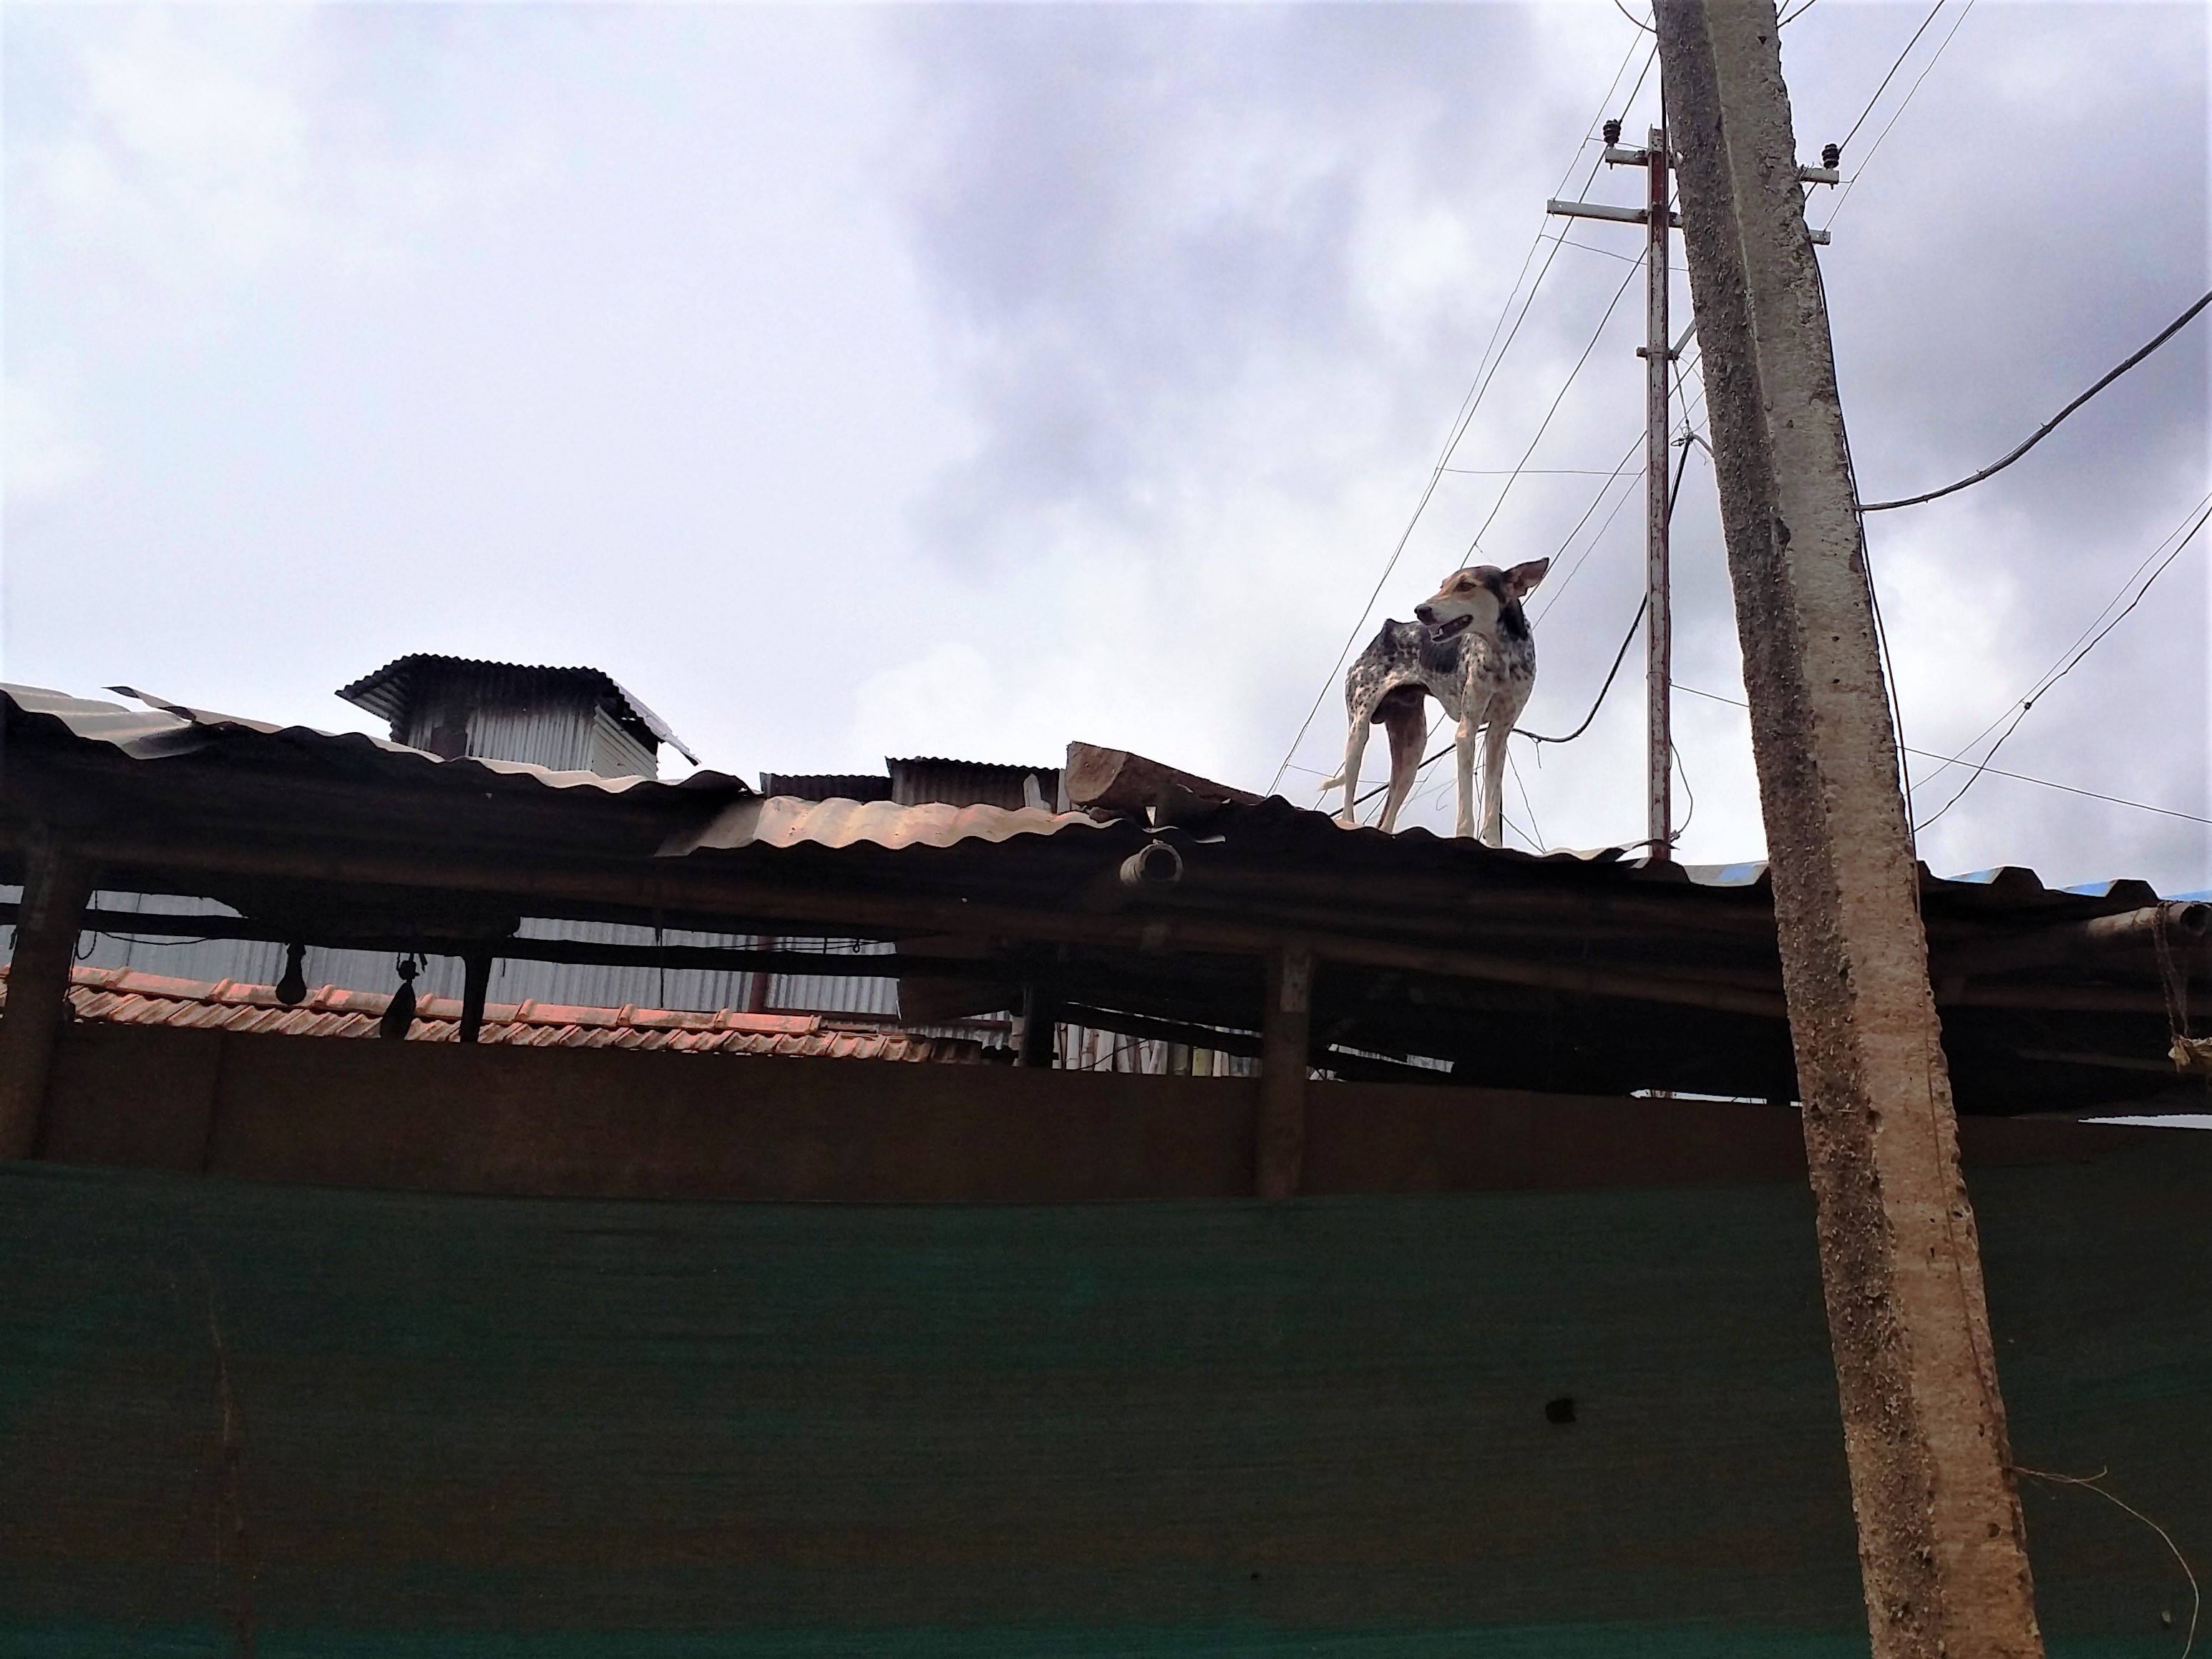 A very thin dog stands on top of a tin roof.